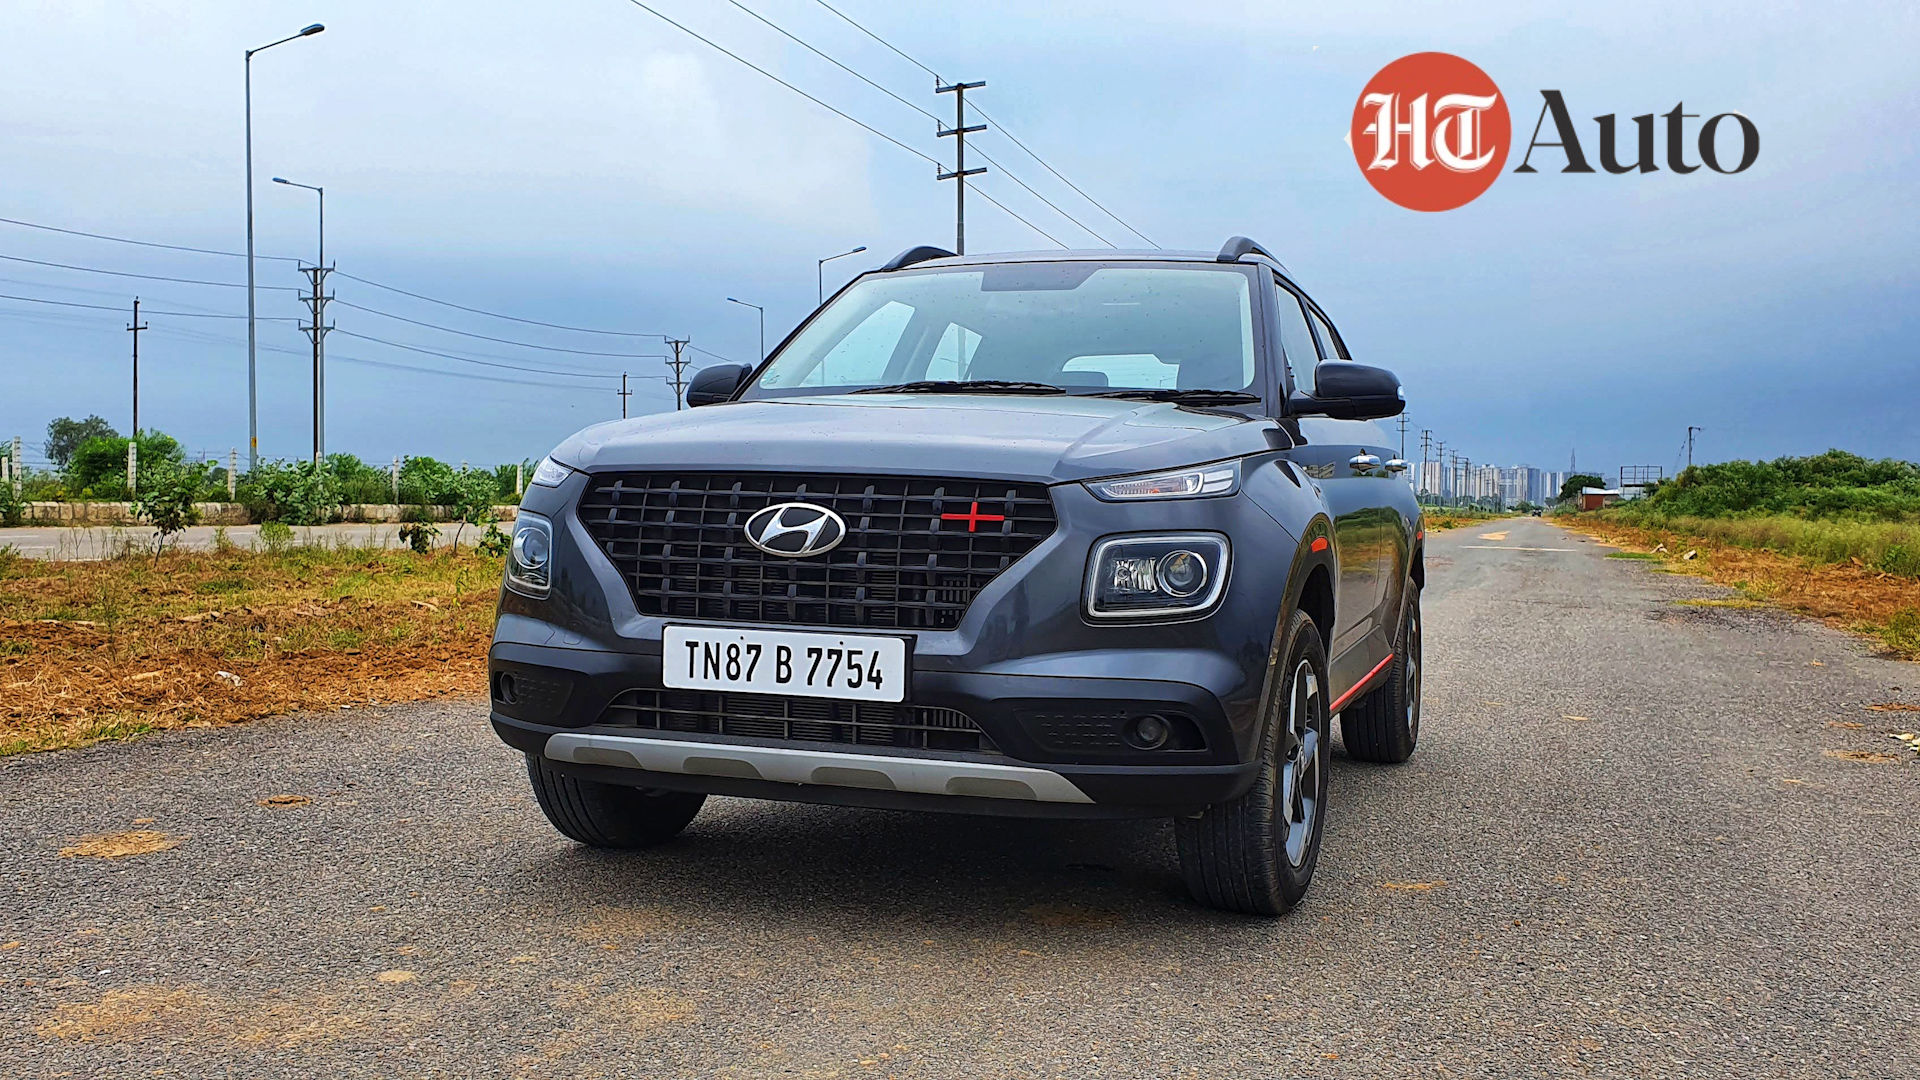 Hyundai remains committed to the visual appeal of the Venue which now comes with the option of dual-tone colours. (Photo: Sabyasachi Dasgupta/HTAuto)